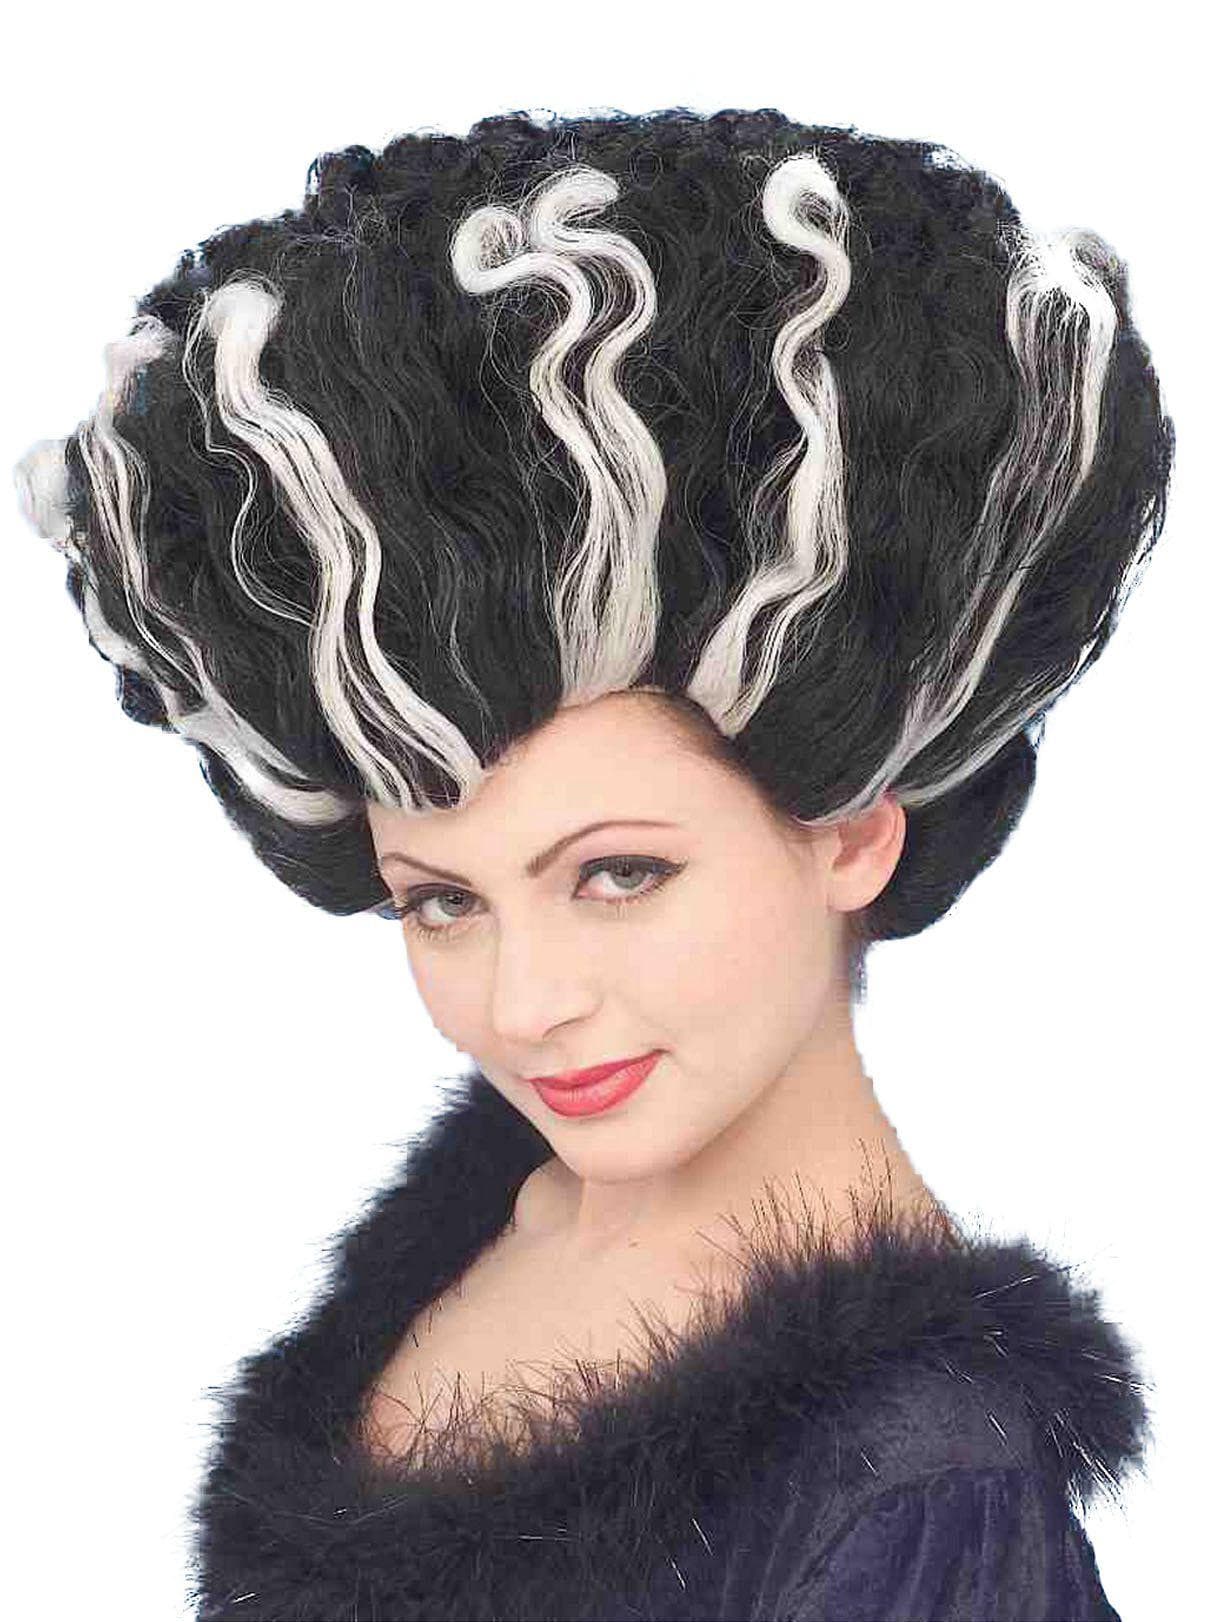 Adult Black and White Monster Bride Wig - Deluxe - costumes.com